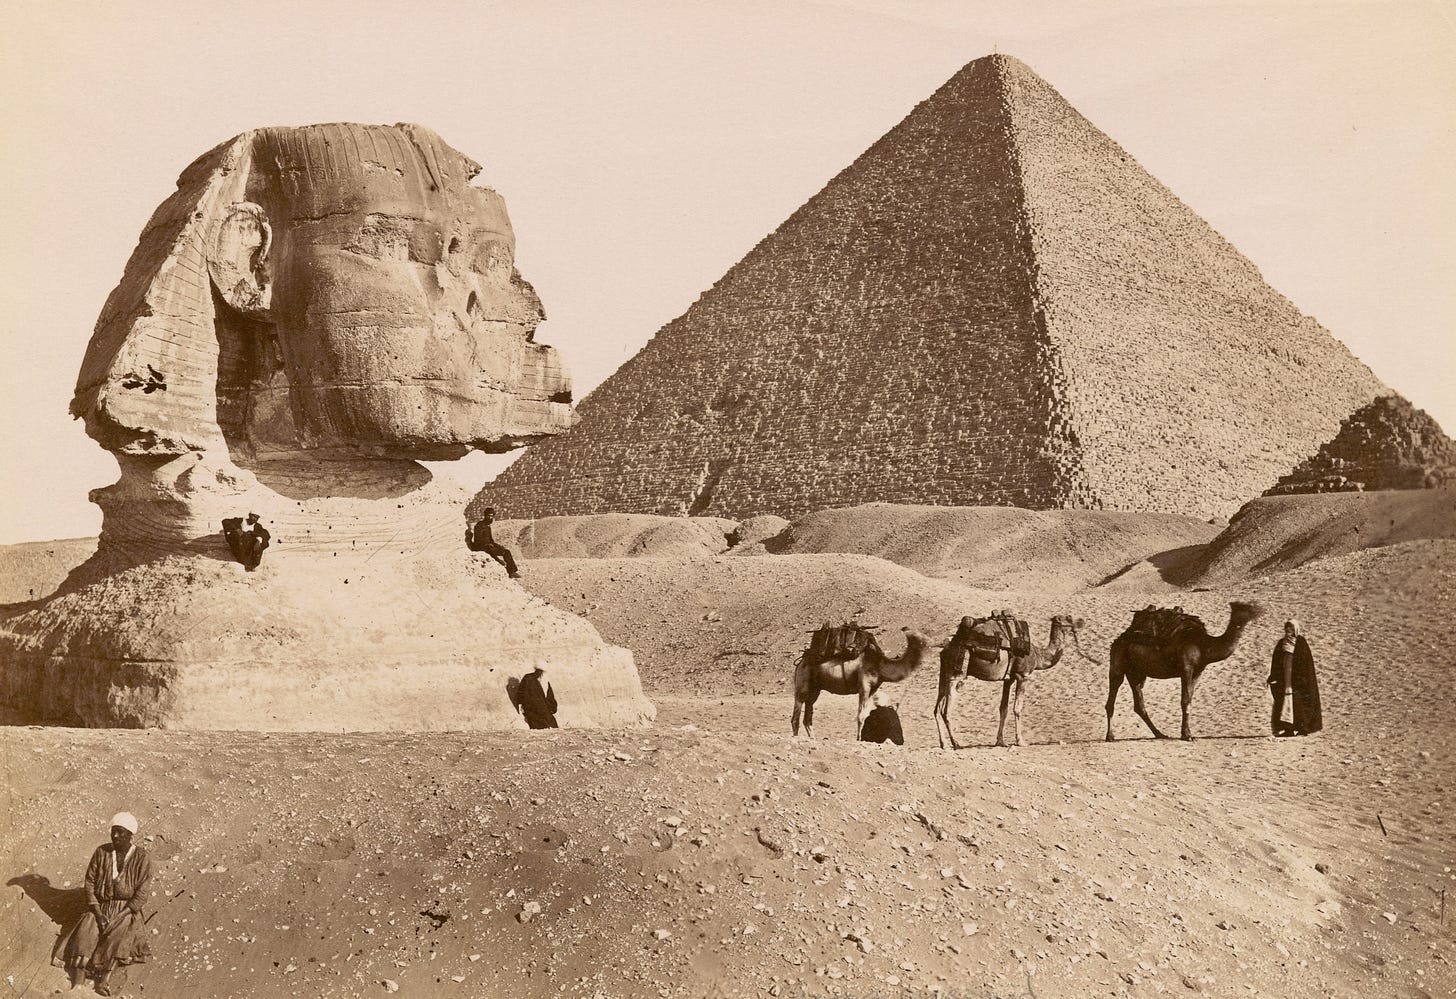 A sepia-toned photo of a pyramid and sphinx with camels and several men in front of them.